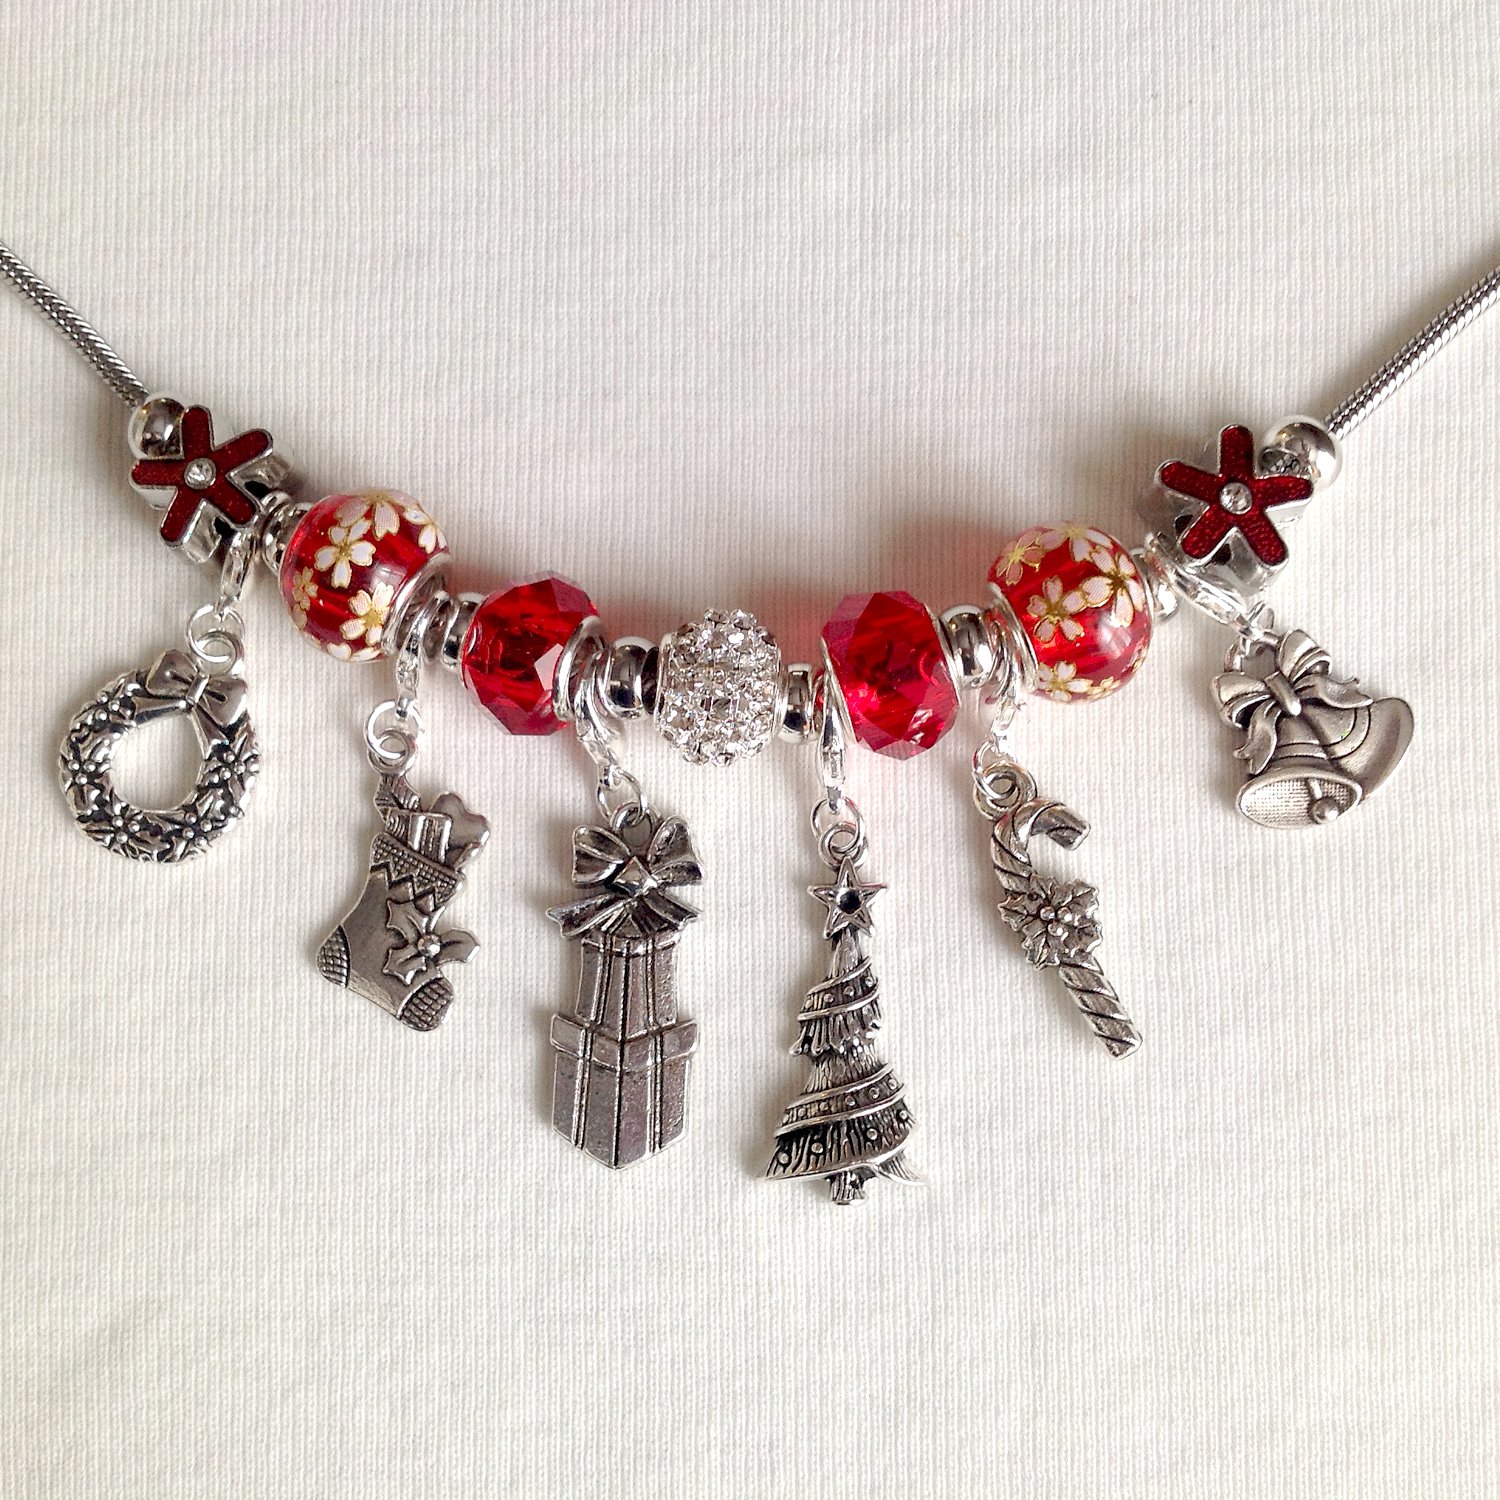  Christmas Memories European Style Charm Bracelet in Silver, Red and White